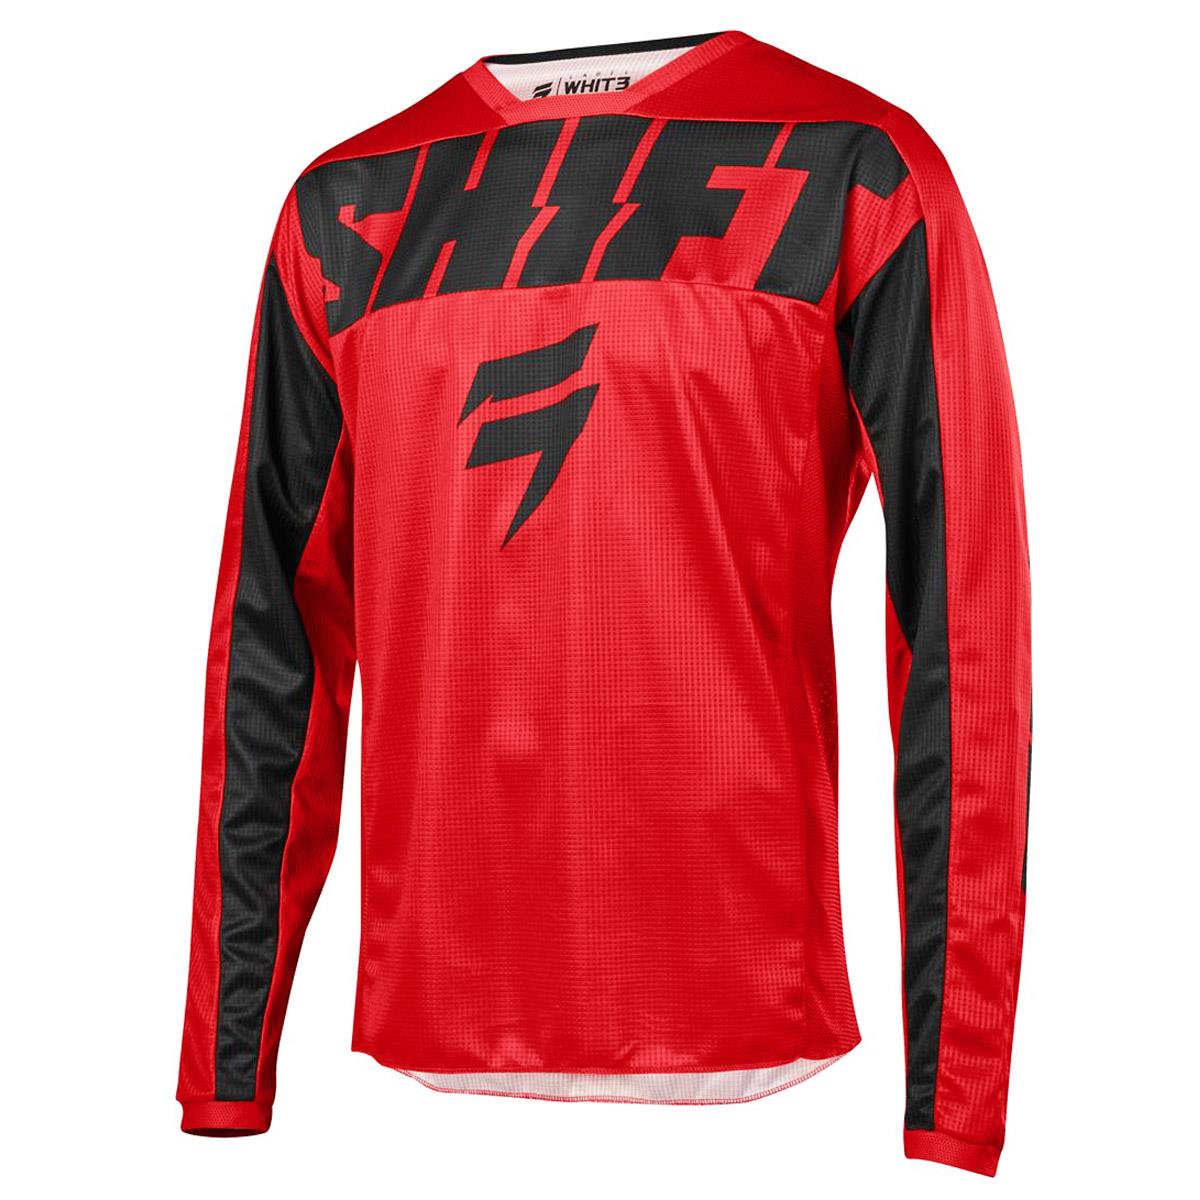 Shift Maillot MX Whit3 Label York Red